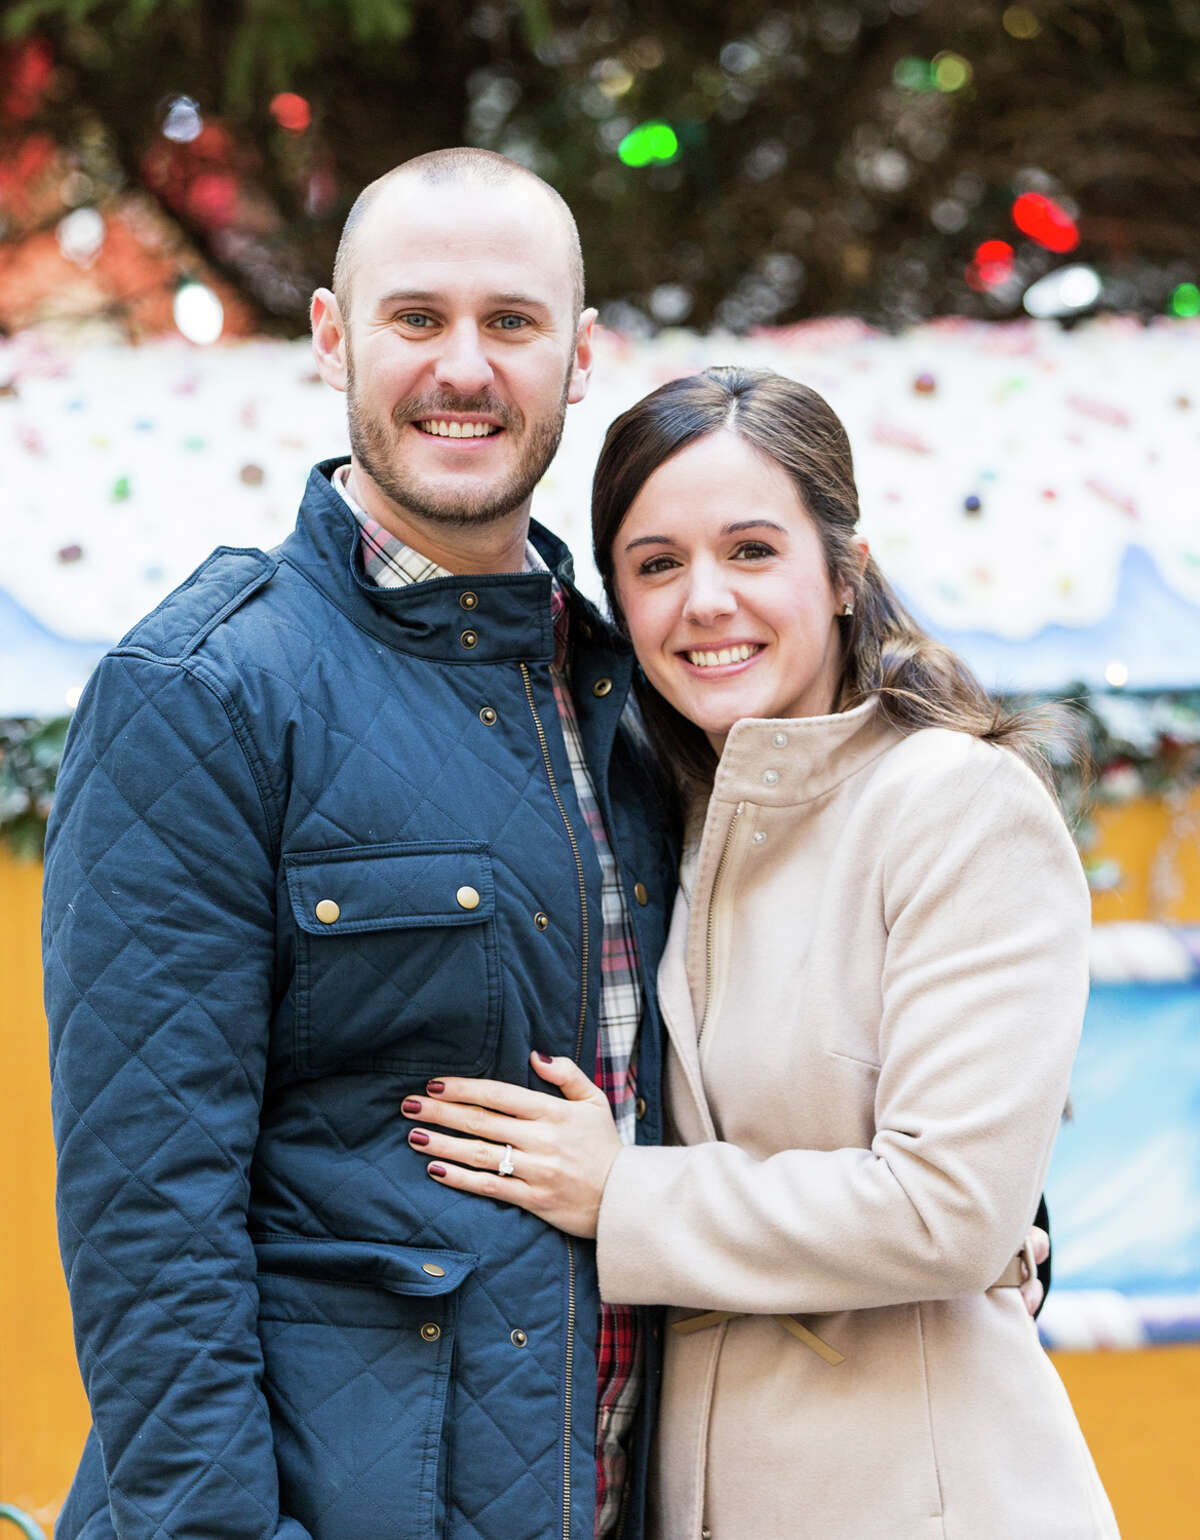 Michael and Mary Romano, of Danbury, announce the engagement of their daughter, Meghan, to Ryan Gallagher, son of John and Joanne Gallagher of Levittown, Pennsylvania.